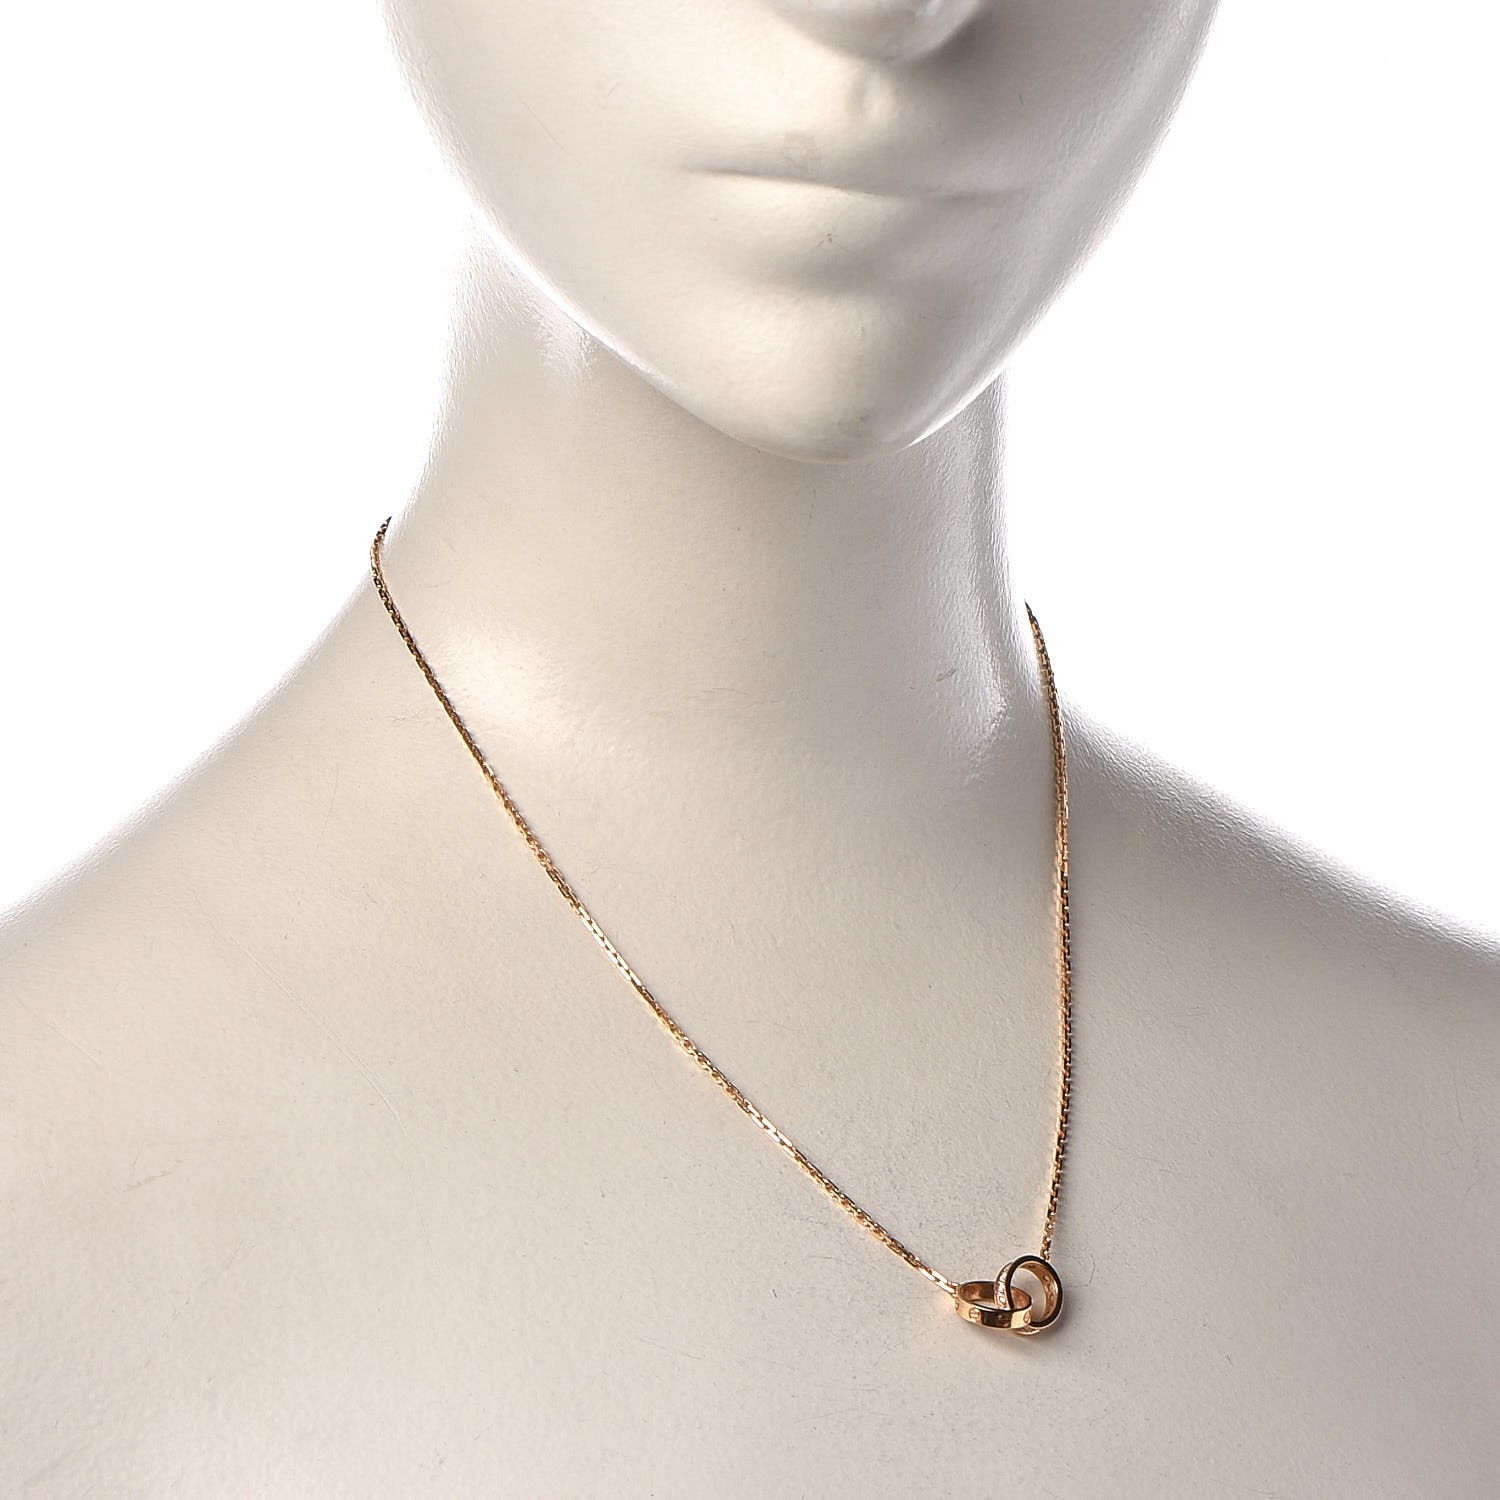 cartier pink gold love necklace